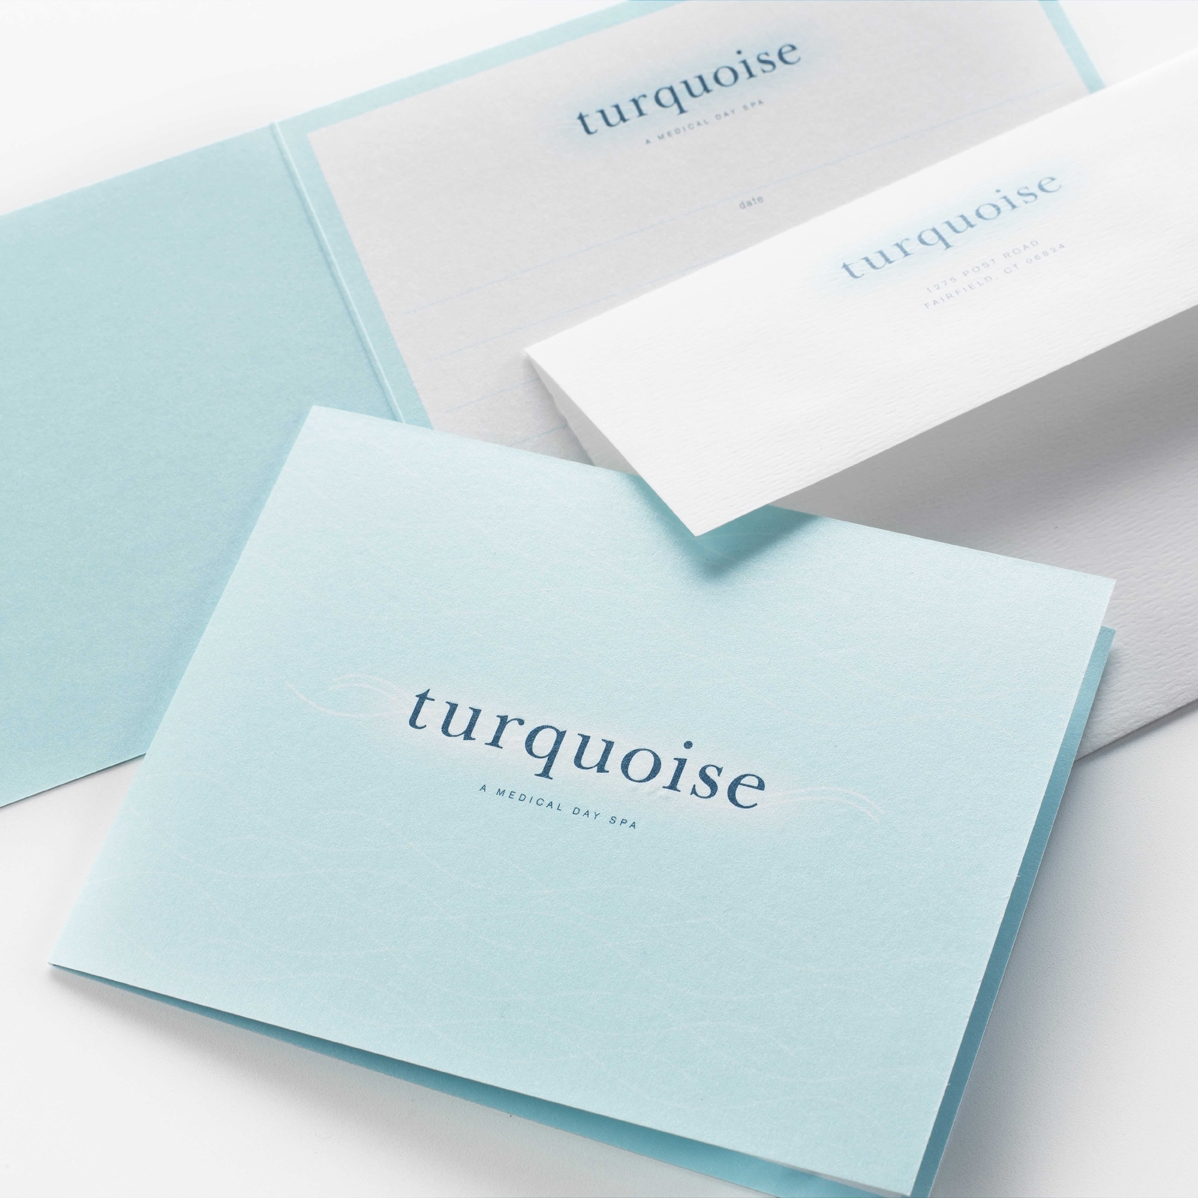 Turquoise_GiftCert_00124.ns.jpg